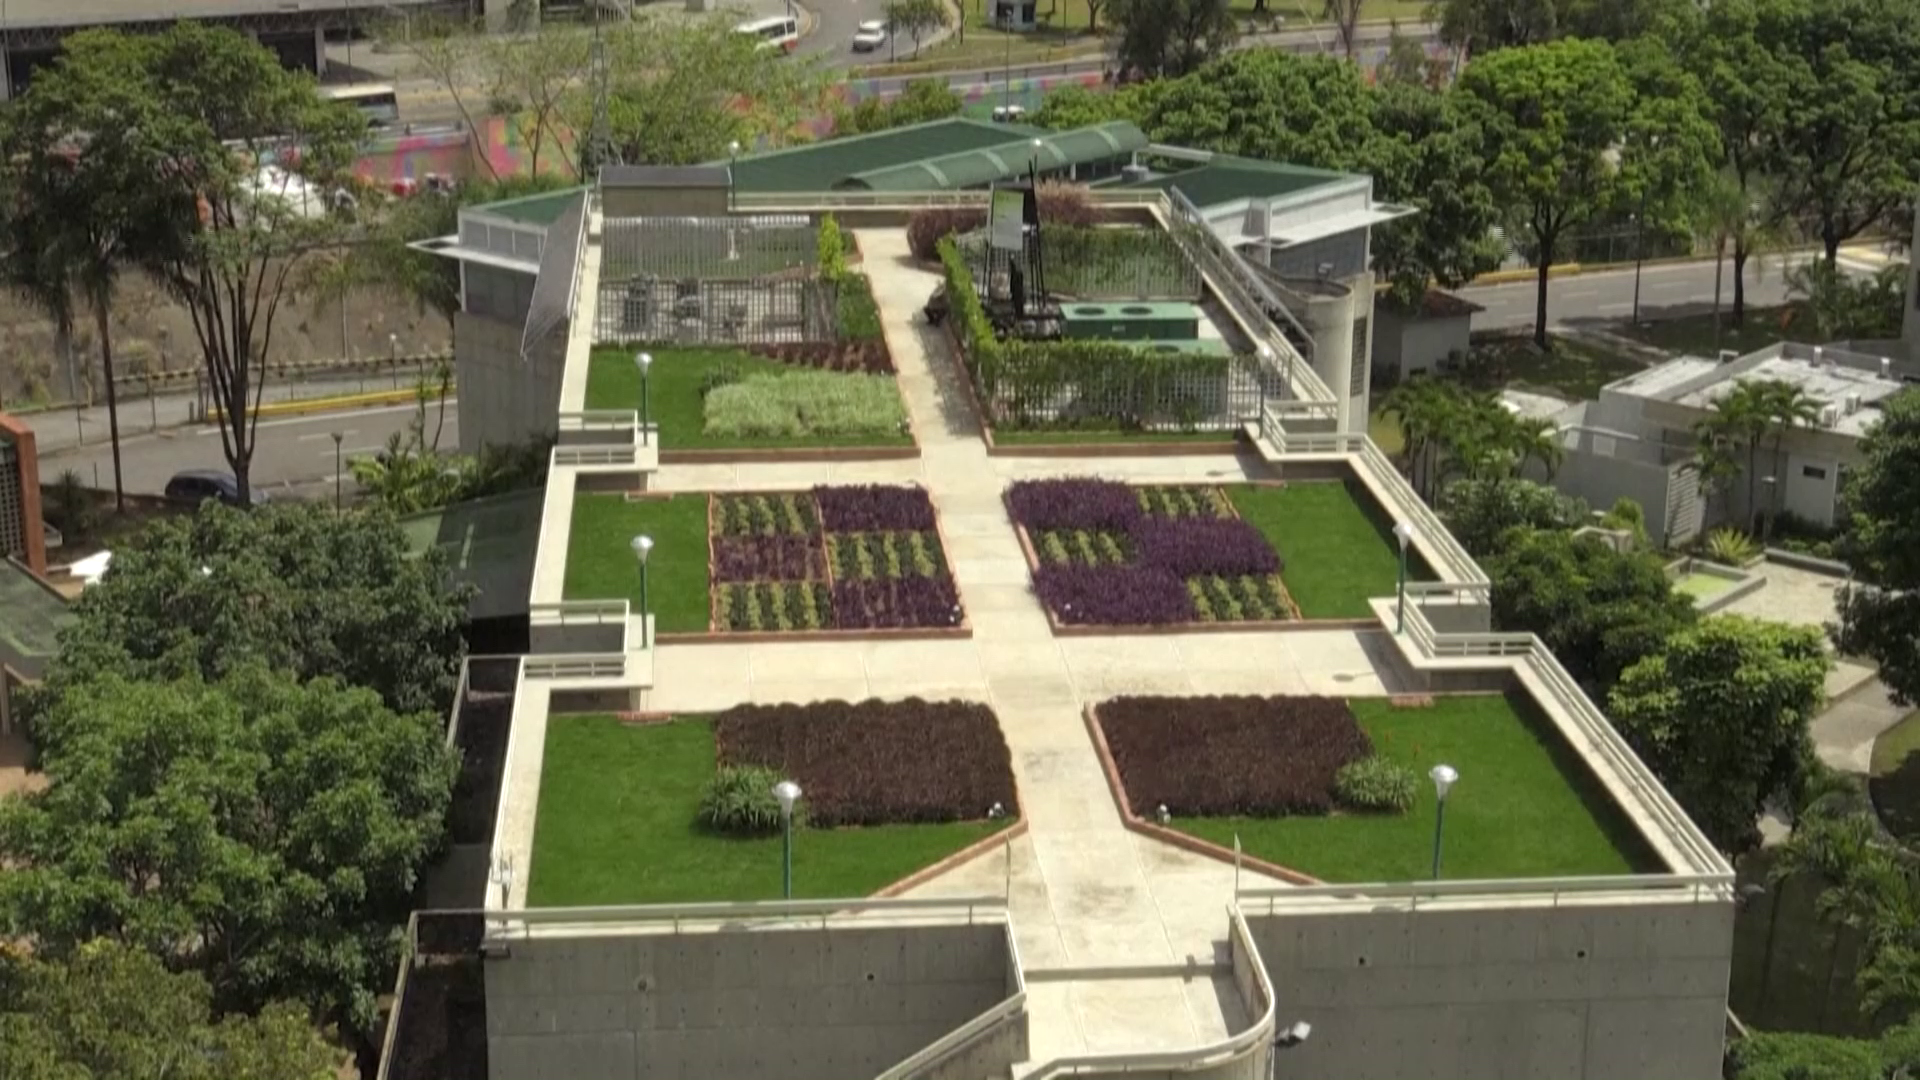 Green roof aims to 'raise awareness' on climate change in Venezuela